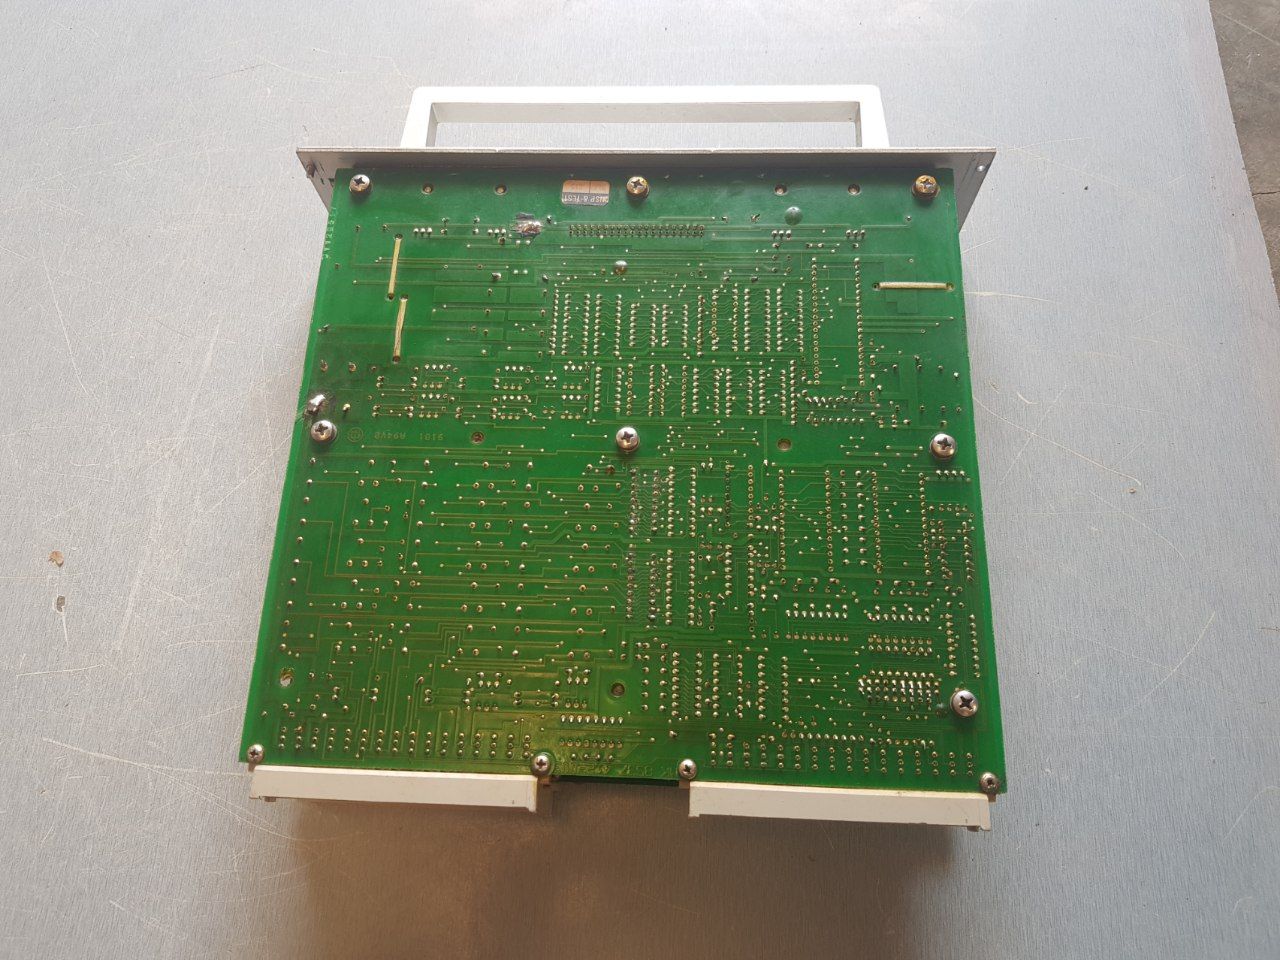 Stalectronic 2000 Pcb Card 8537 000-421